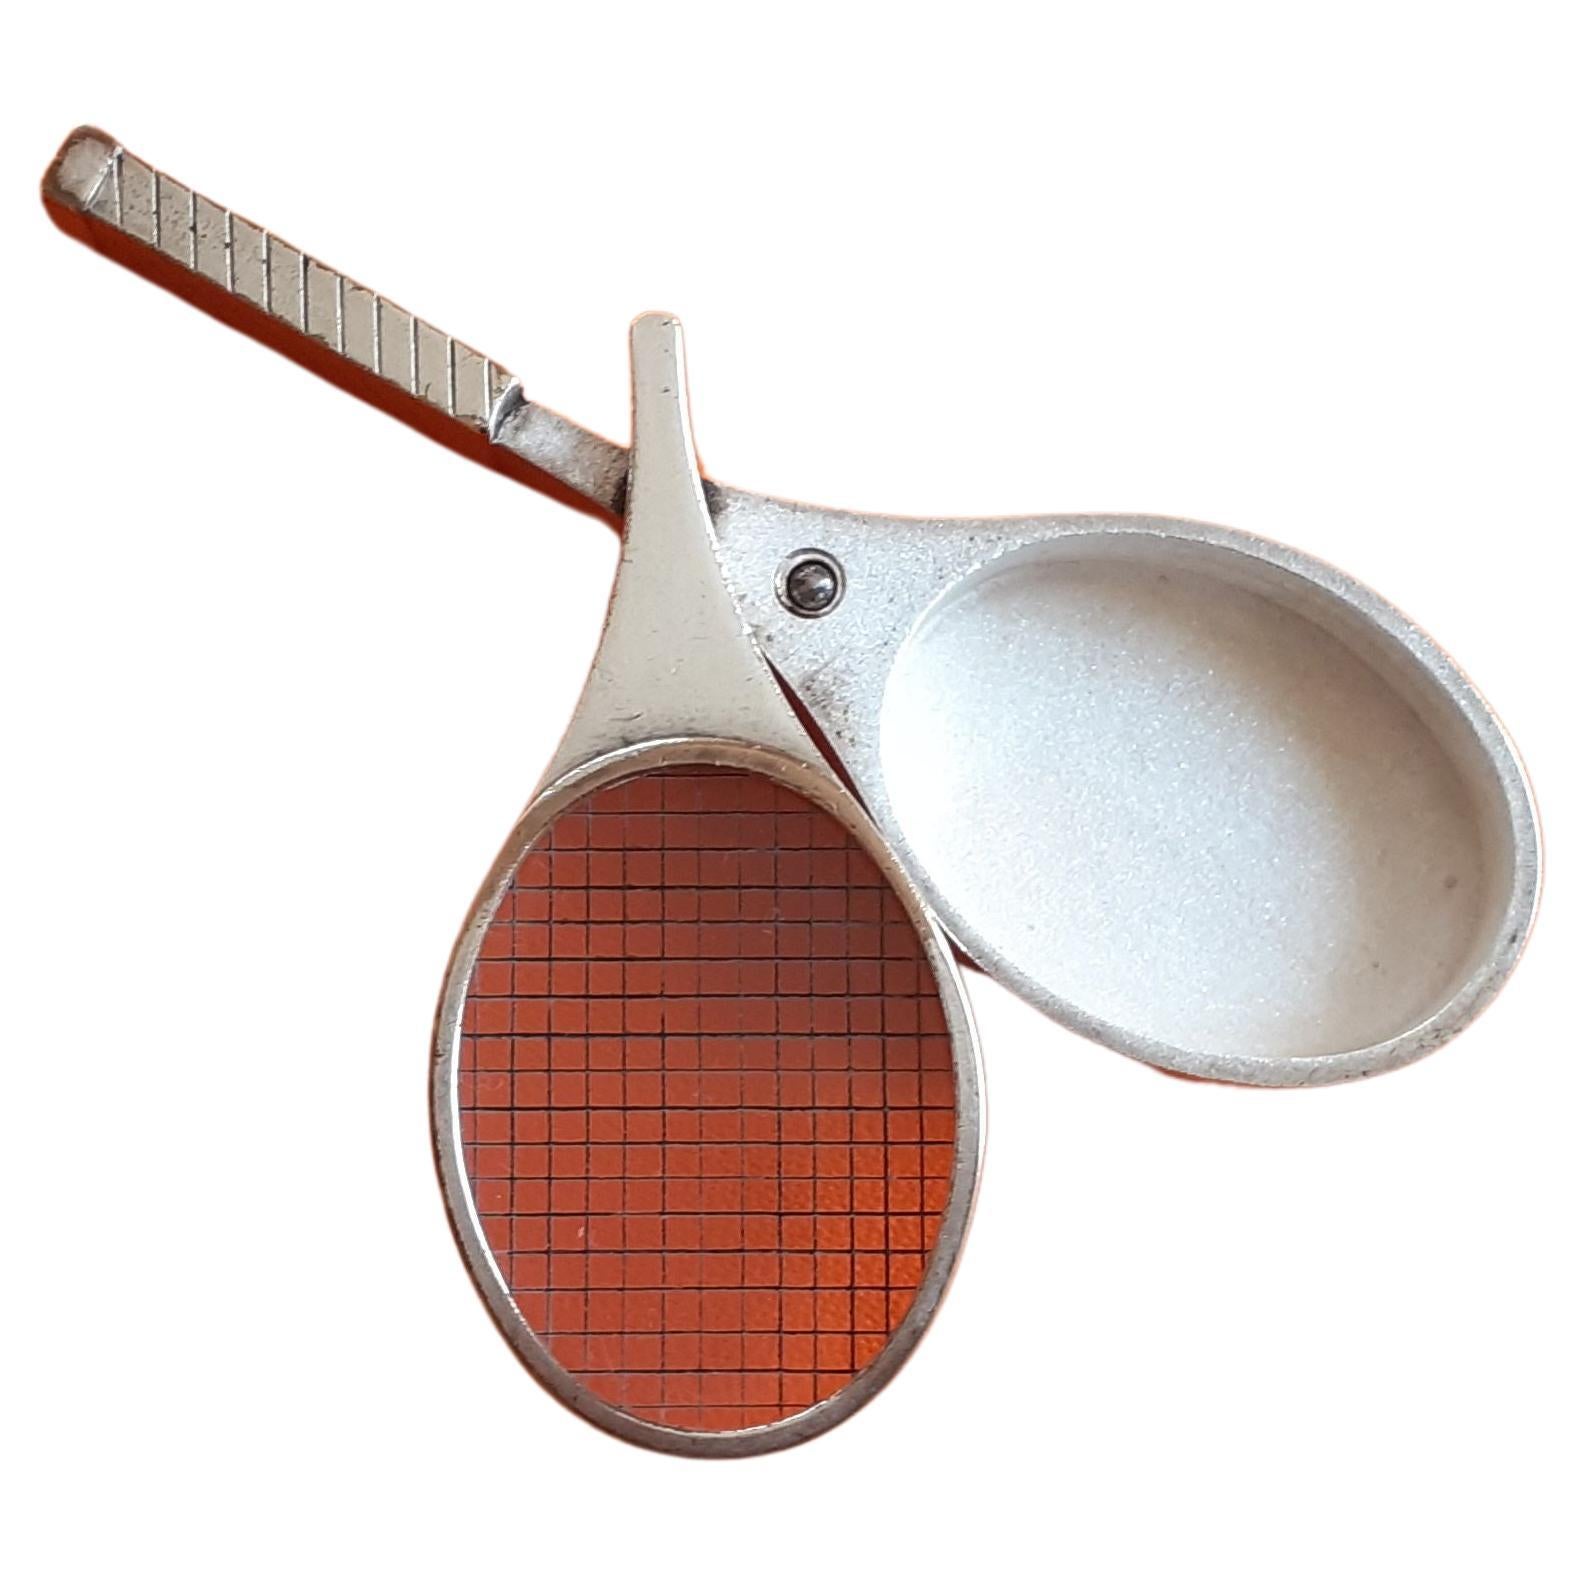 Rare and Collectible Authentic Hermès Pill Box

Tennis Racquet Shaped

Vintage item

Made of metal

The lid is made of transparent plastic on which are drawn lines representing the ropes of the racquet

Opens by sliding the lid 

